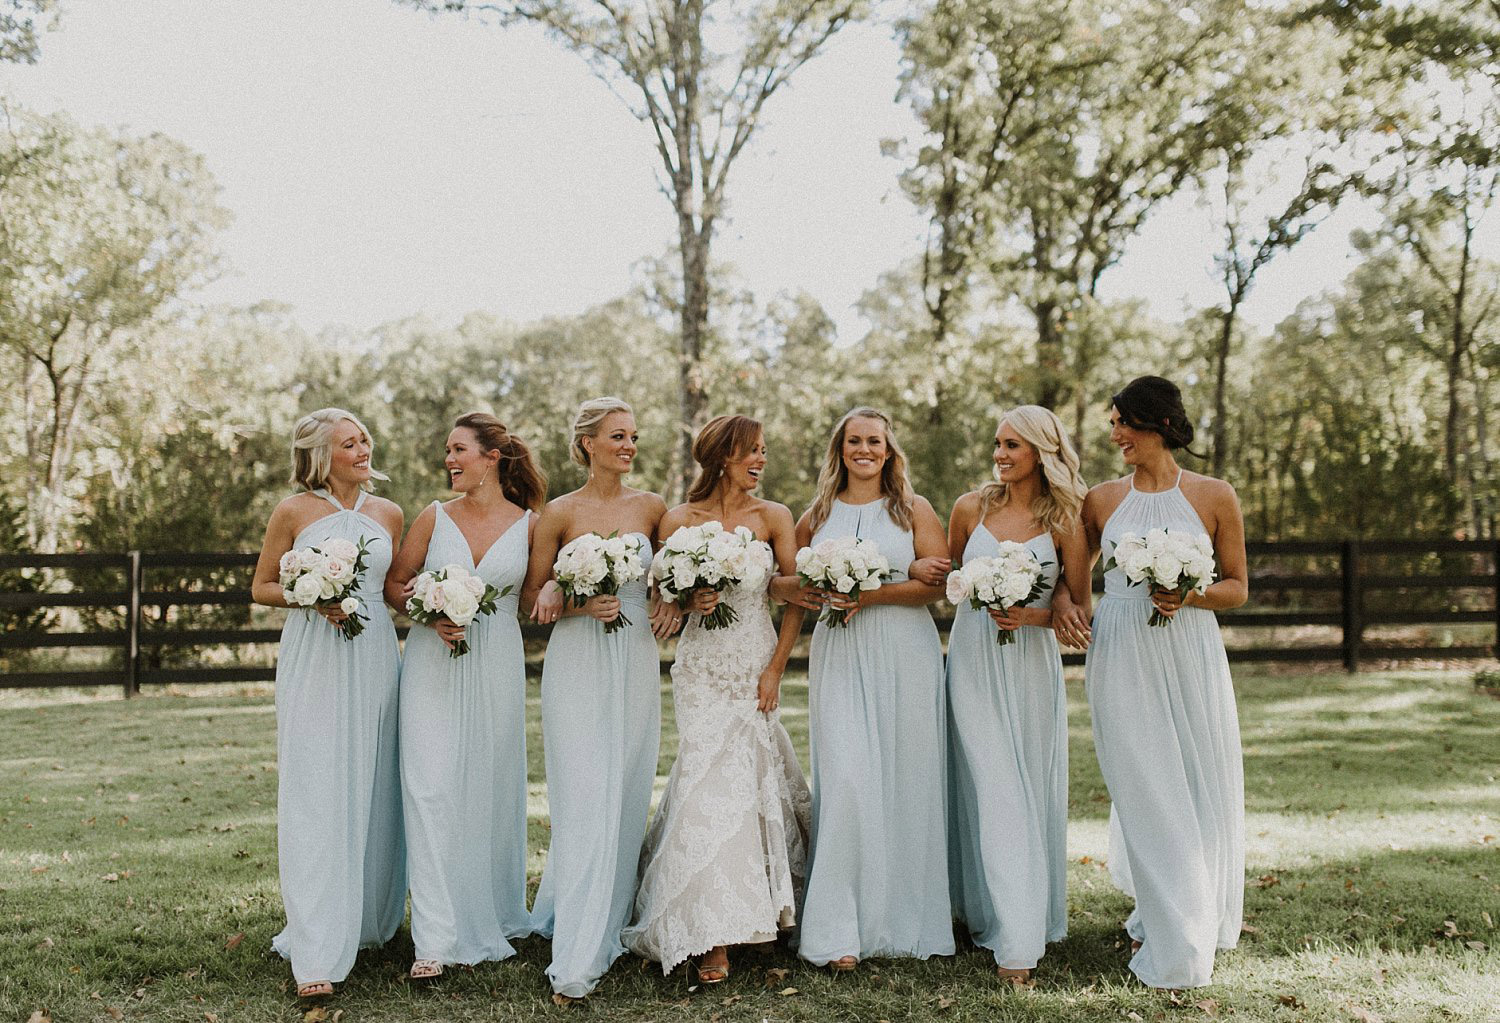 These dusty blue bridesmaid dresses were perfect for this rustic wedding! They matched perfectly with the white and blush bridesmaid bouquets. 